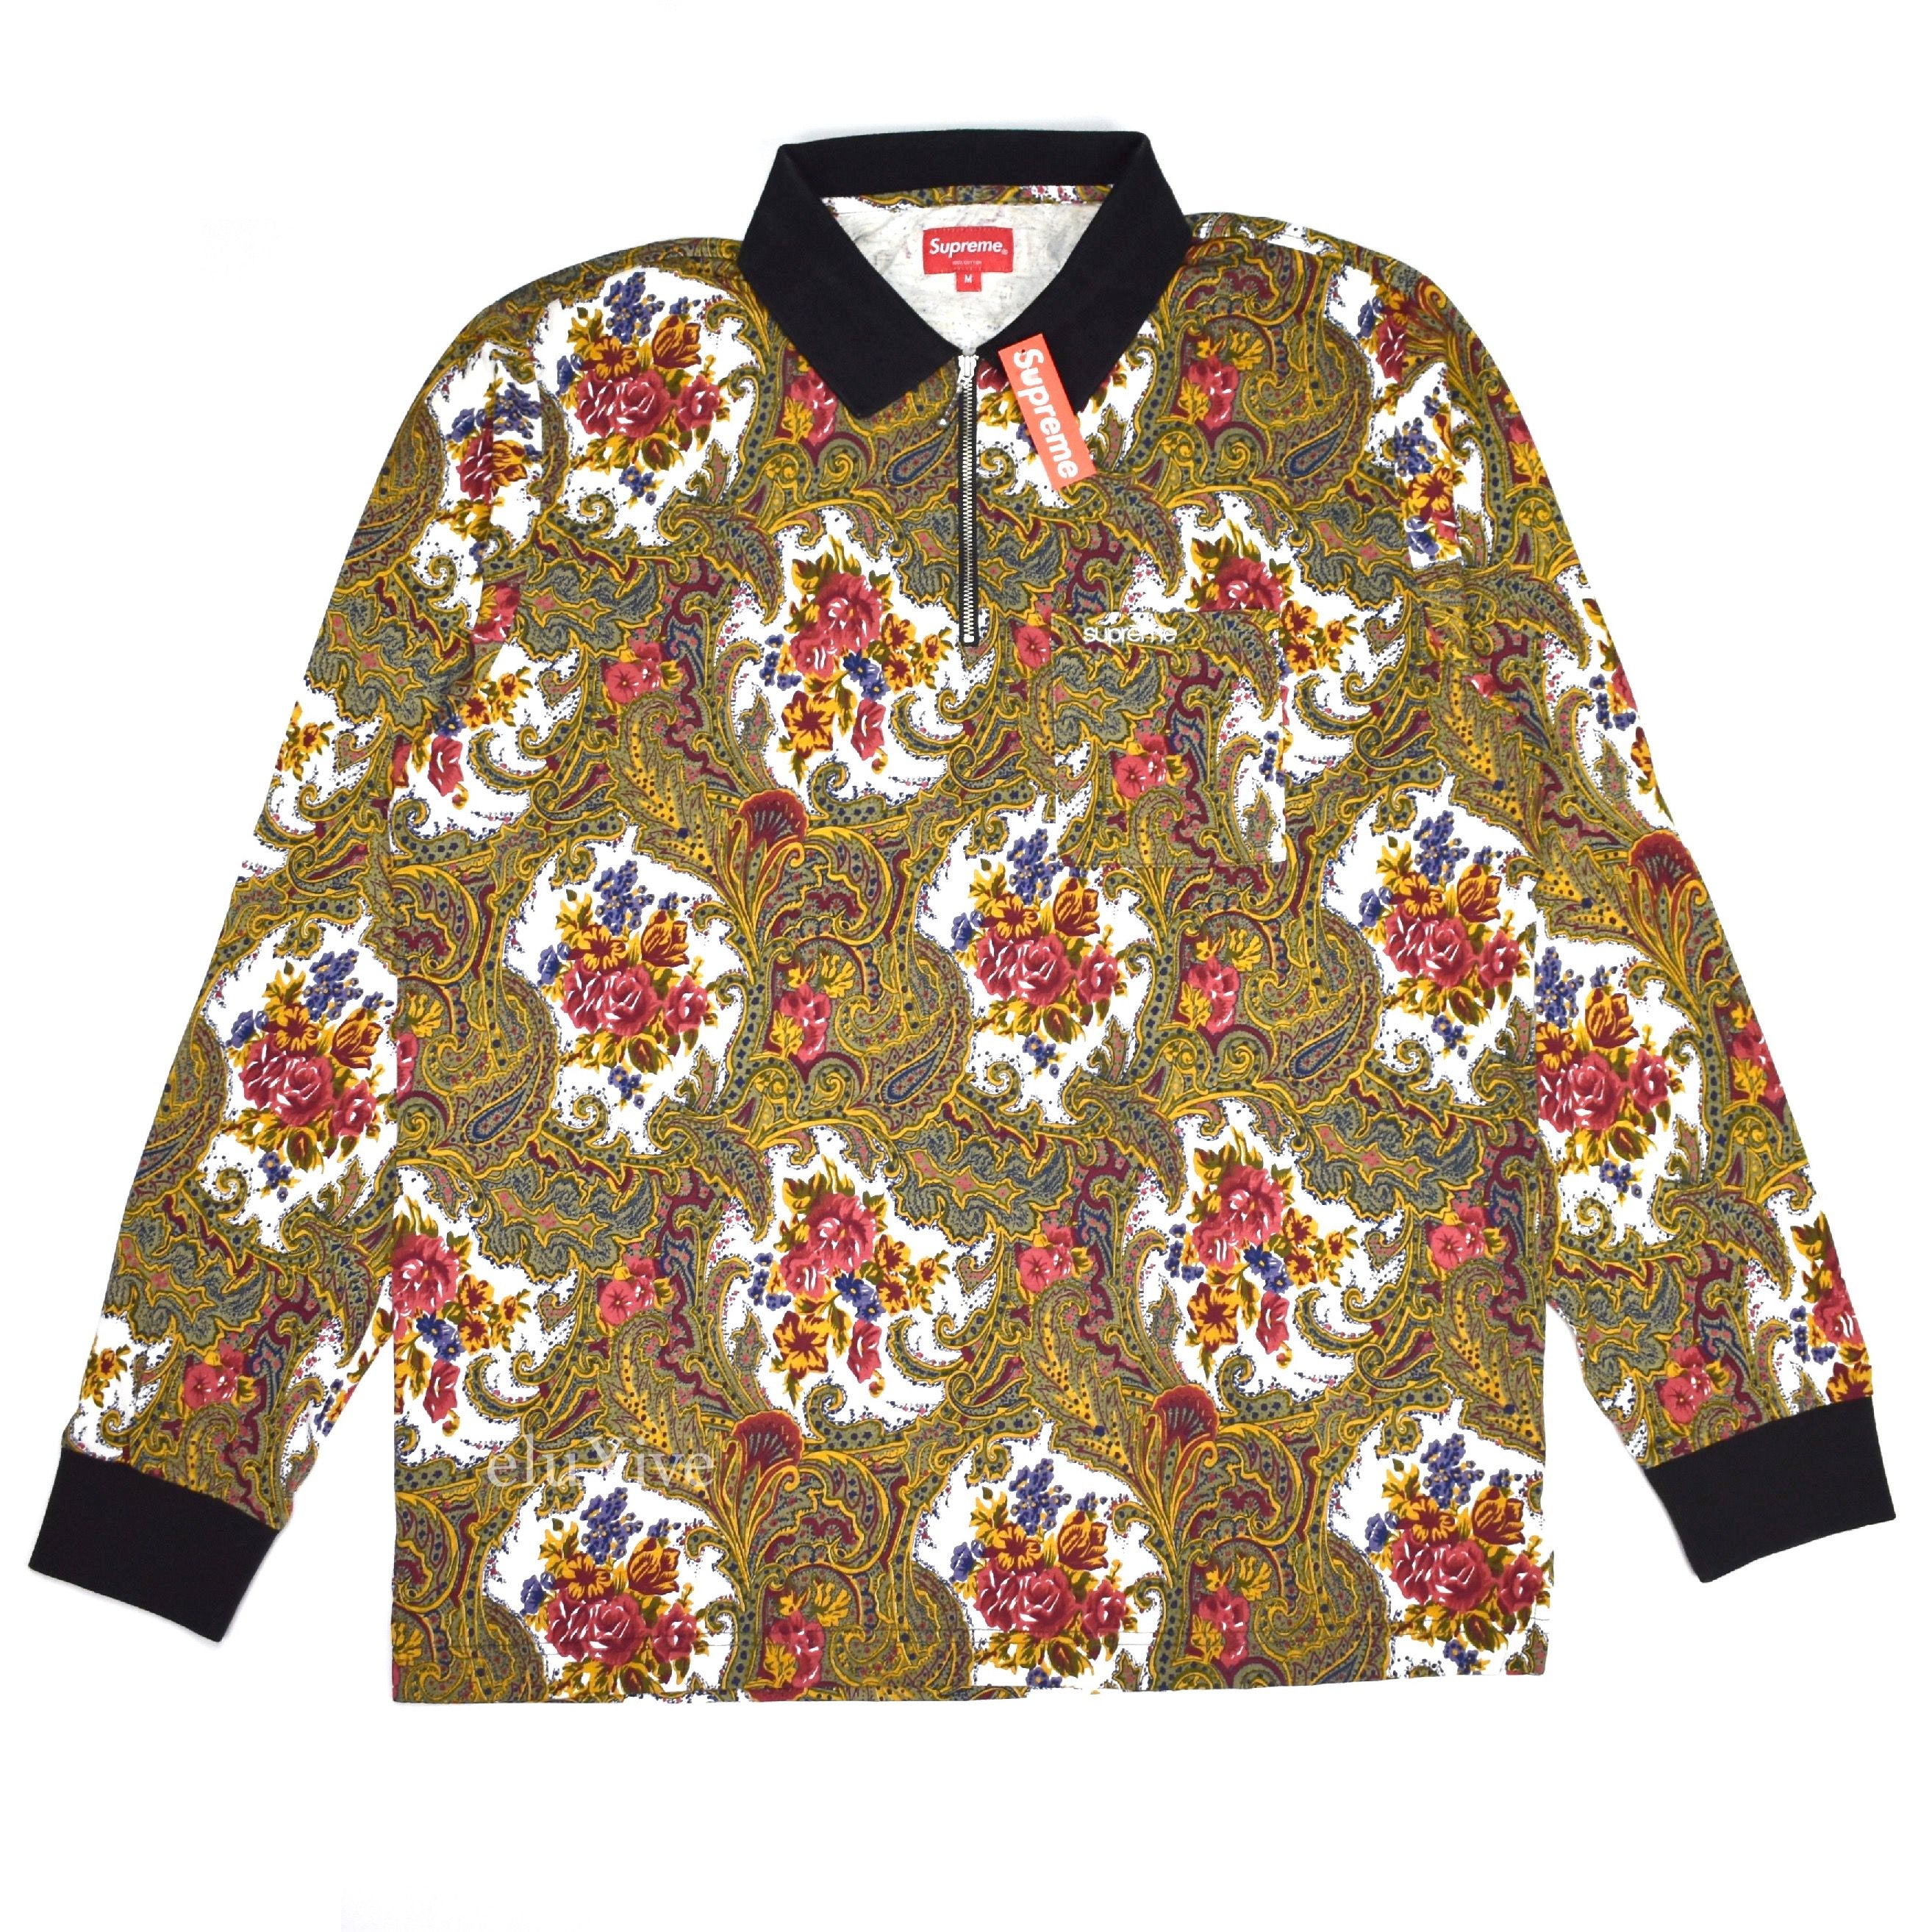 Supreme - Men's Gold Paisley Print Logo Embroidered Zip-Up Polo